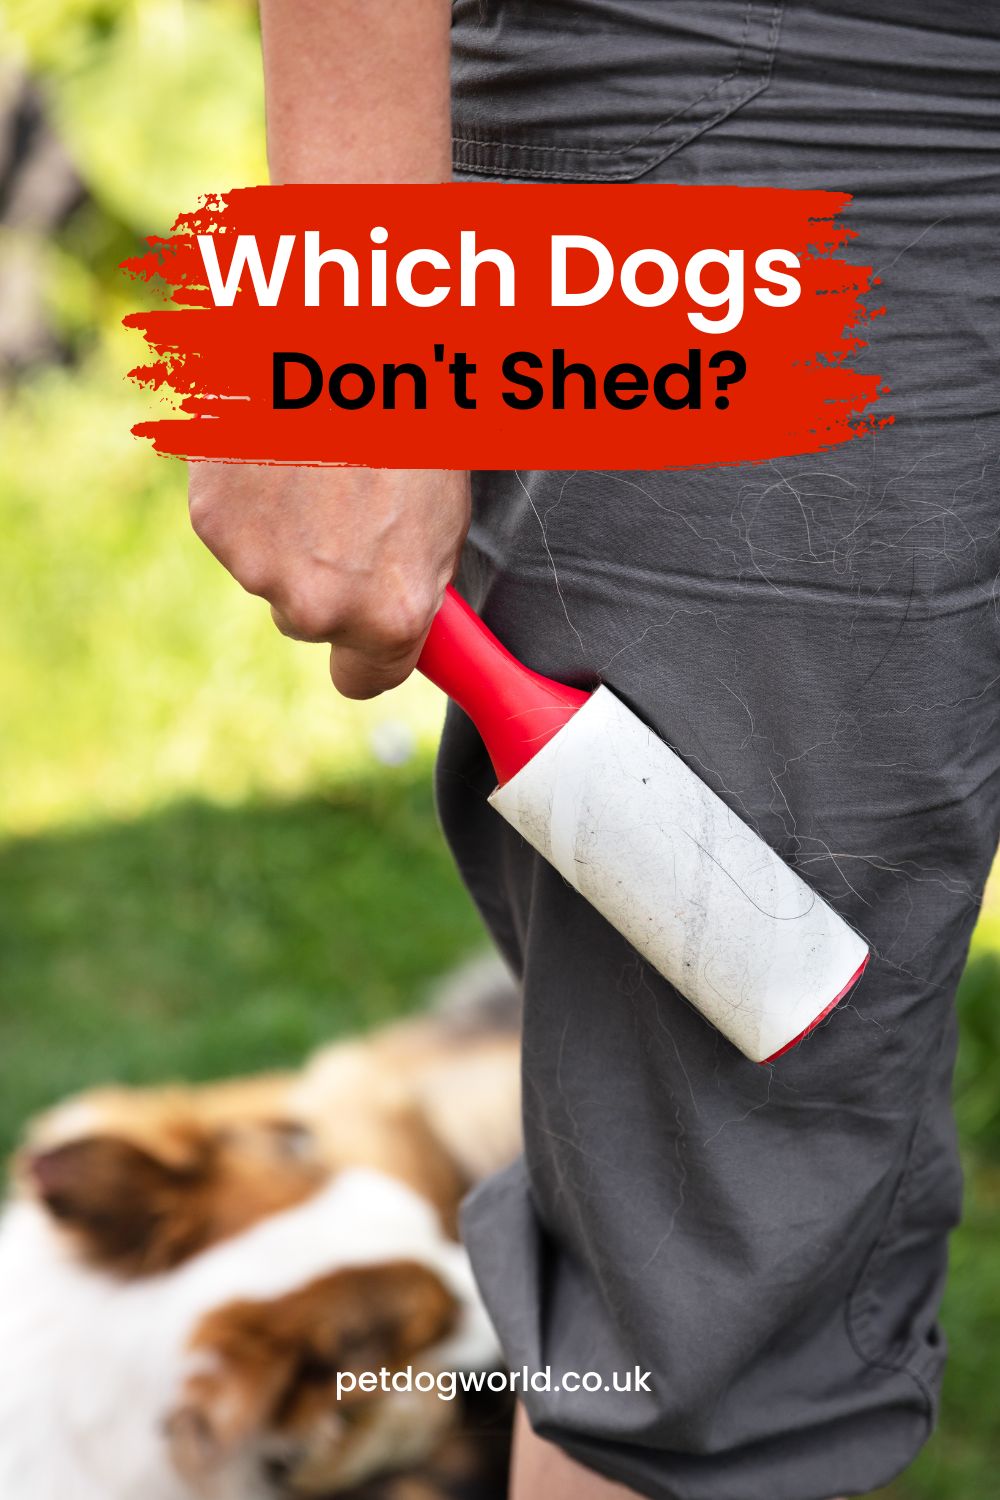 We dive into various low-shedding dog breeds, perfect for those seeking a fur-free home without missing out on the joy of a four-legged friend.